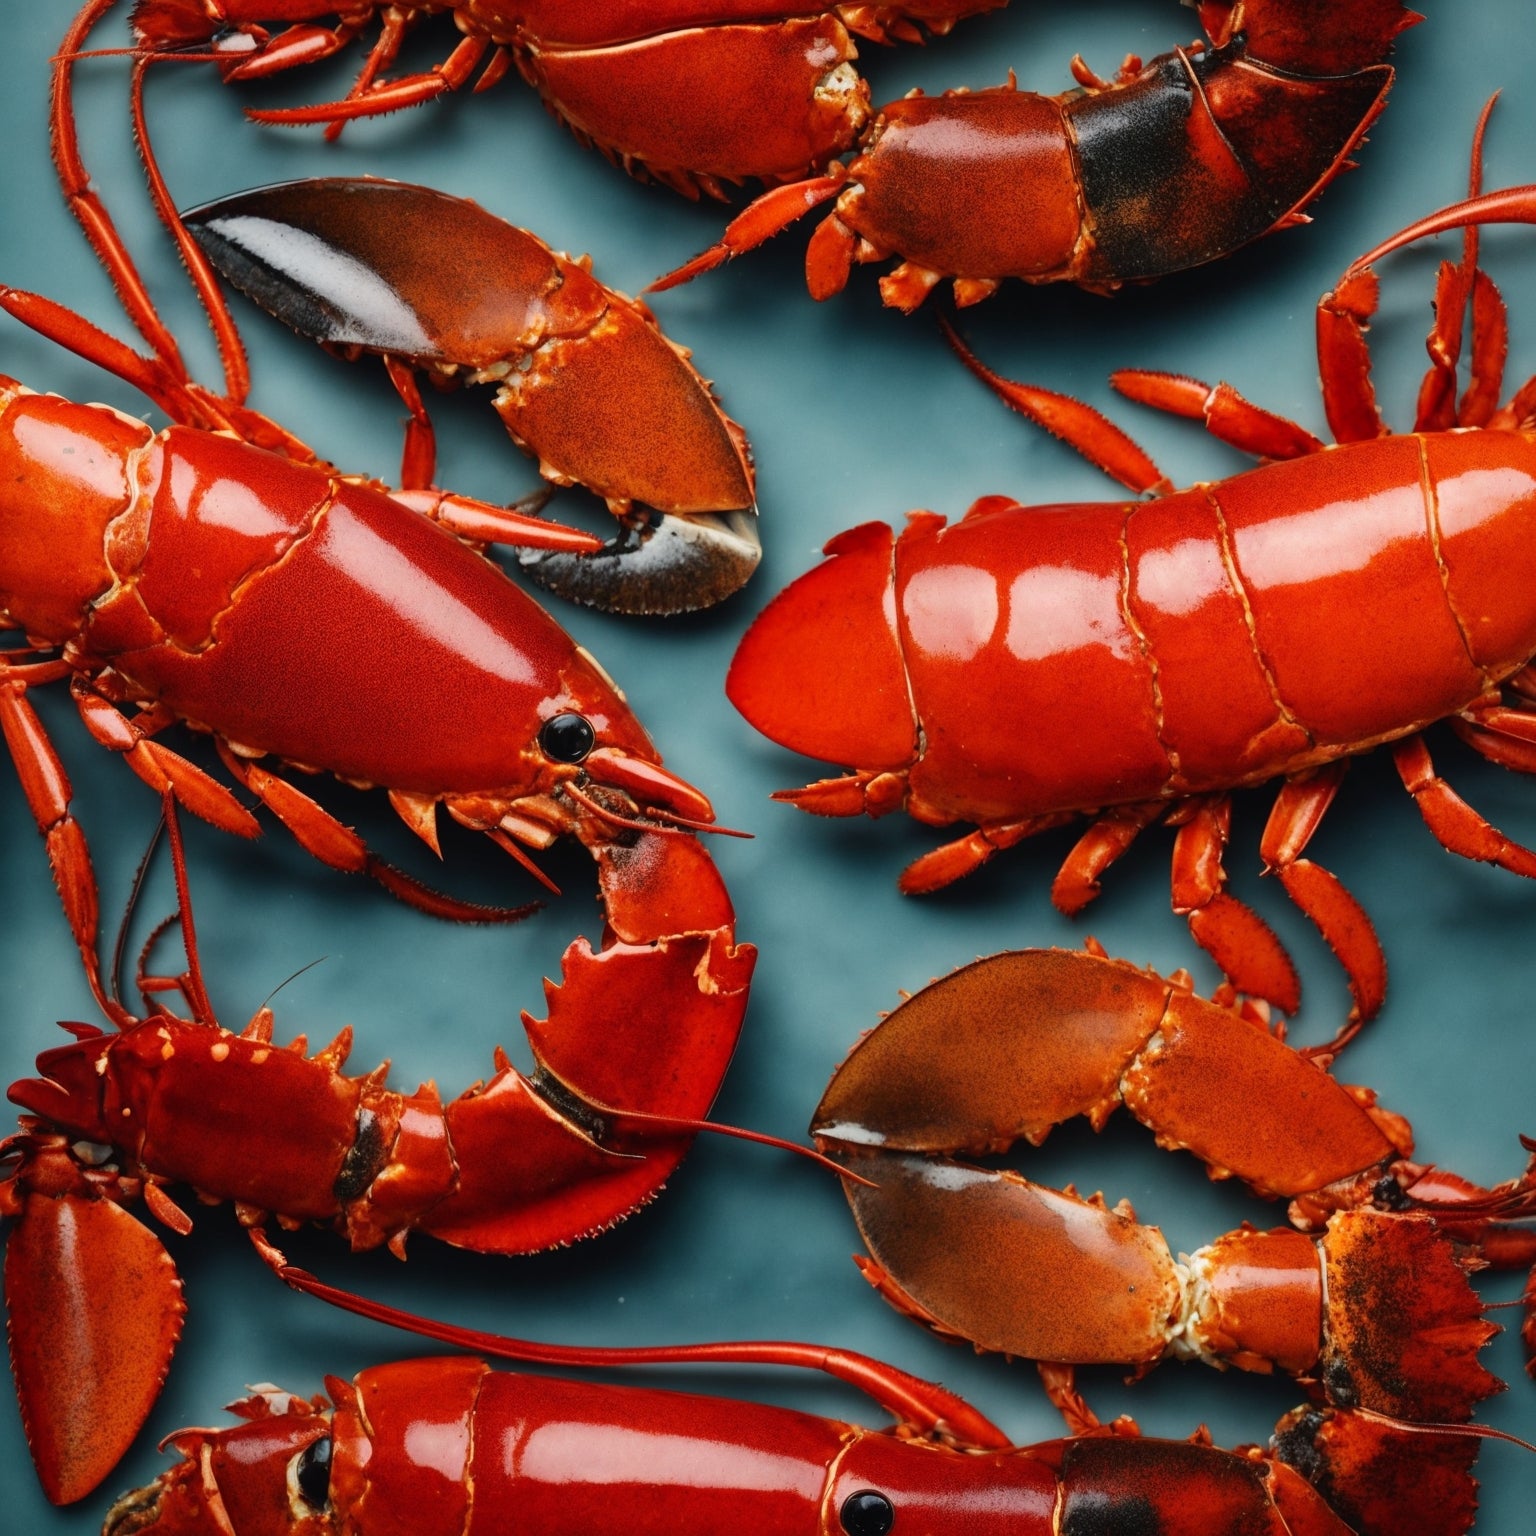 Lobster Lovers' Paradise: Global Seafoods' Live Lobsters Selection